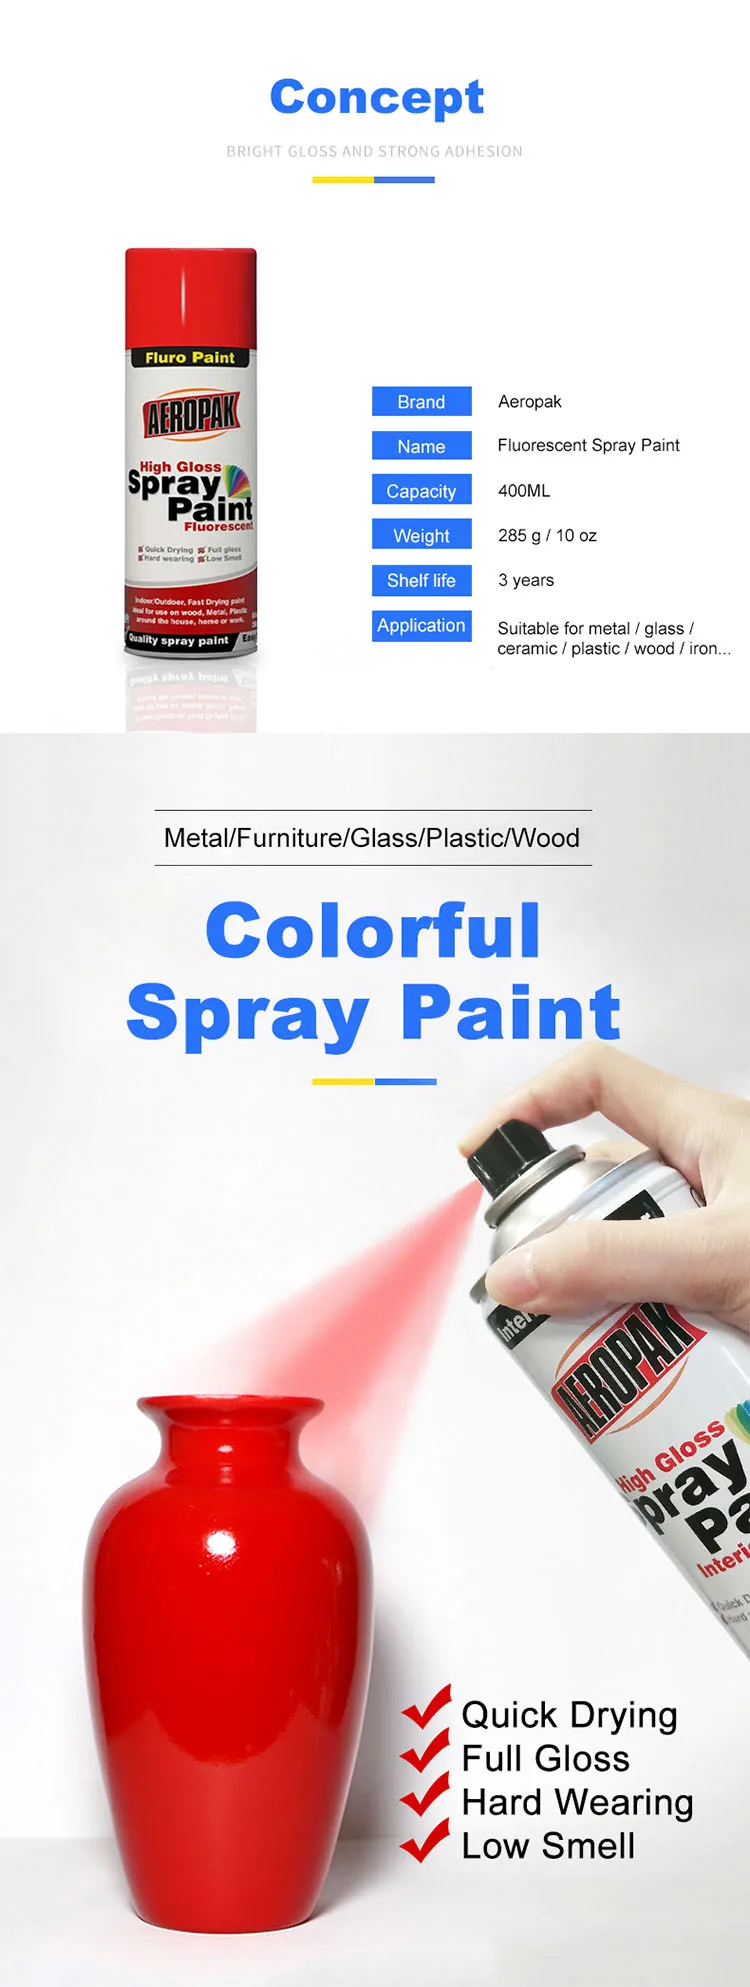 China Supplier Florescence Spray Paint Fast Drying 400ml Dry Glass